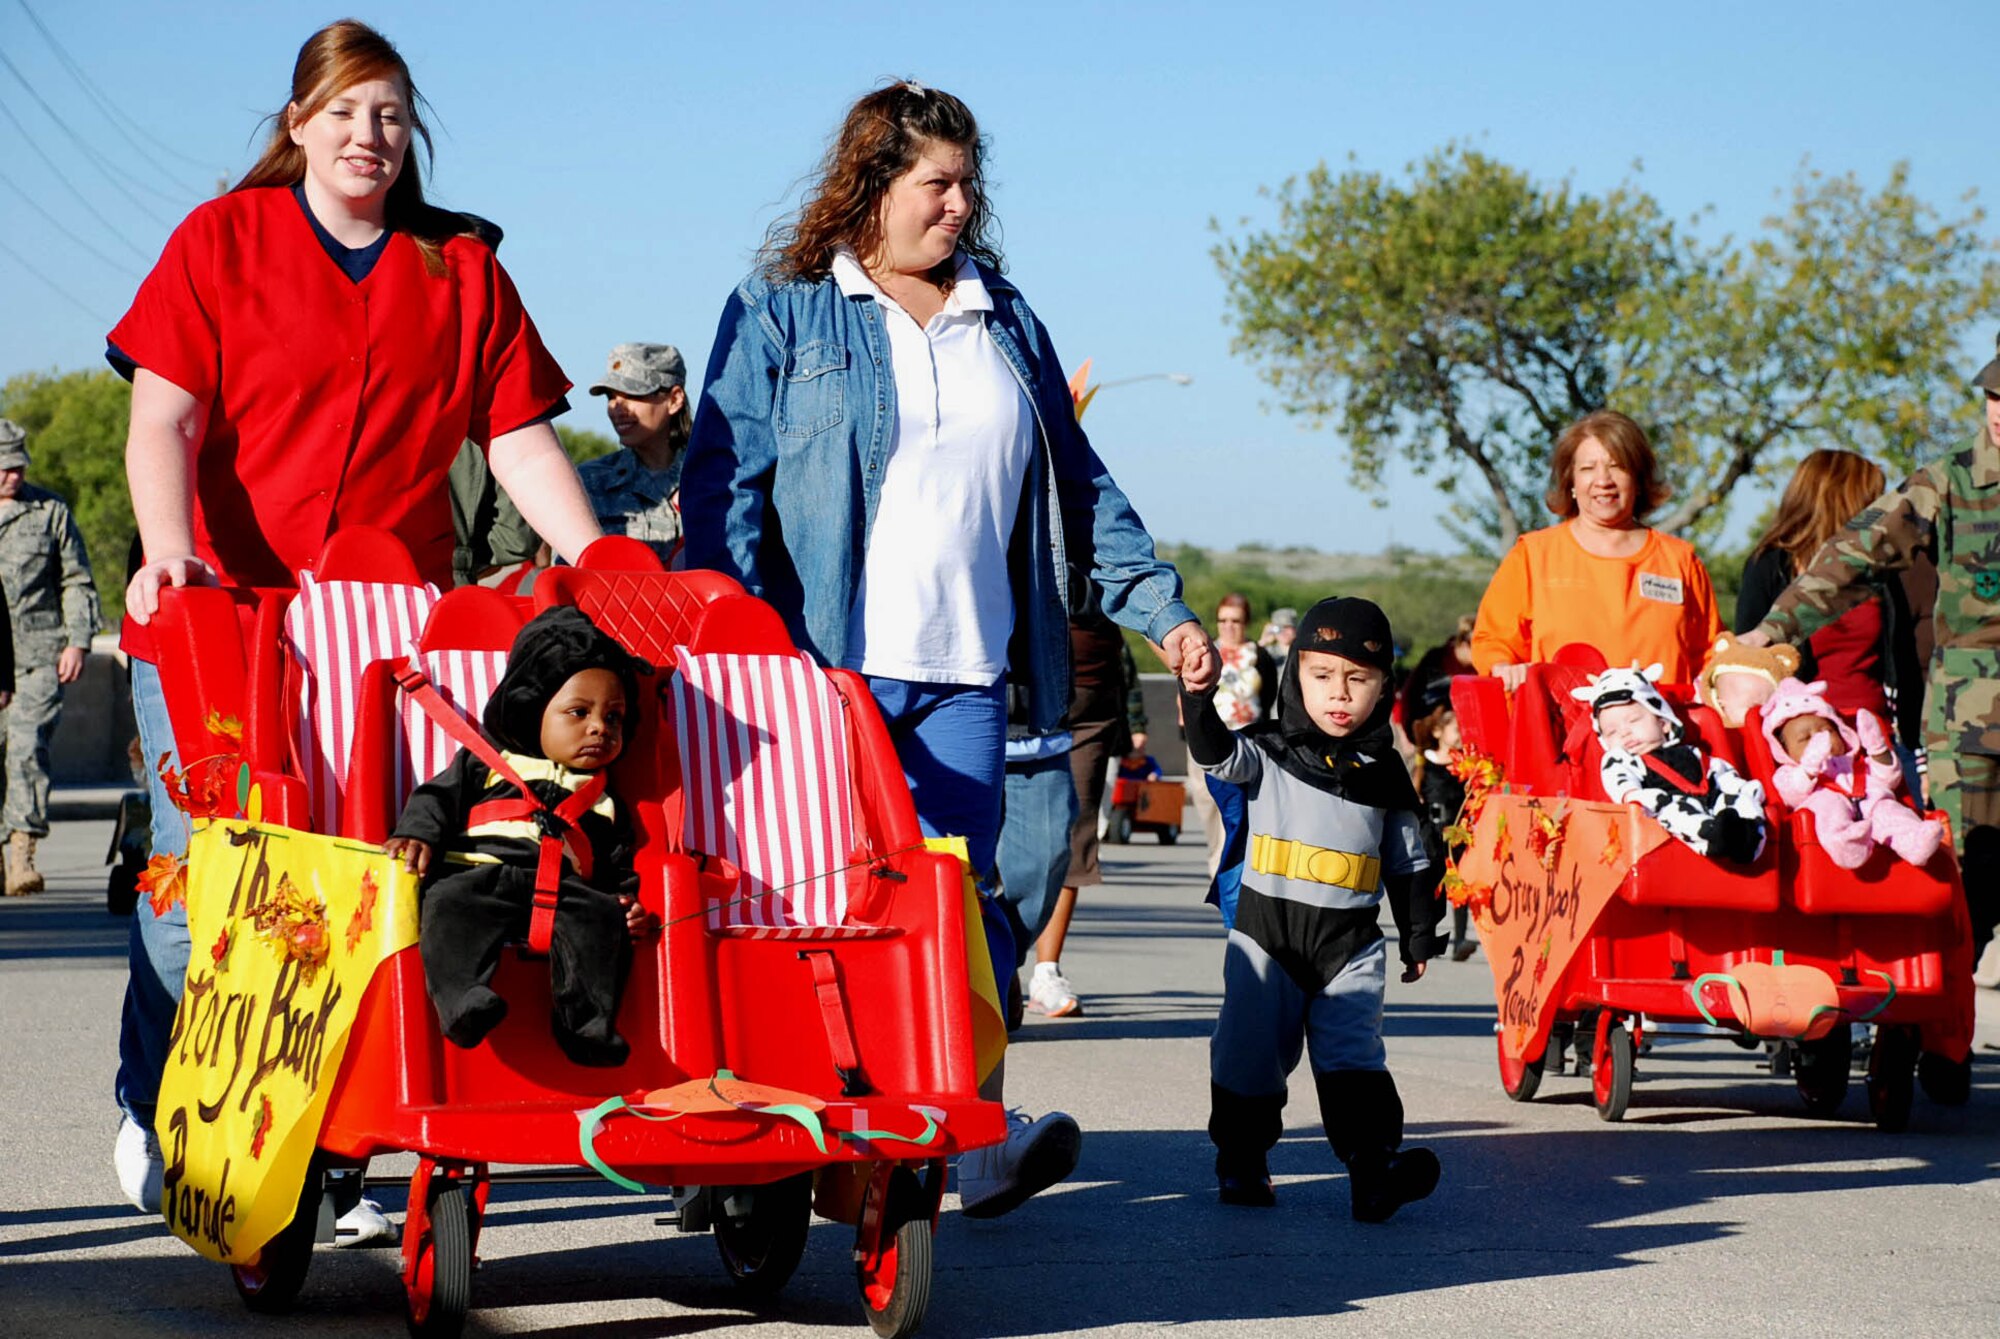 LAUGHLIN AIR FORCE BASE, Texas – Laughlin parents walk with their children around Ribas-Dominicci Circle for the Child Development Center's Storybook Parade to celebrate literacy Oct. 24. Throughout the month, the children listened to stories and were then asked to come dressed as their favorite character for a parade. Costumes ranged from Spiderman to Dr. Seuss characters and other creative outfits. (U.S. Air force photo by Airman 1st Class Saar Csurilla)